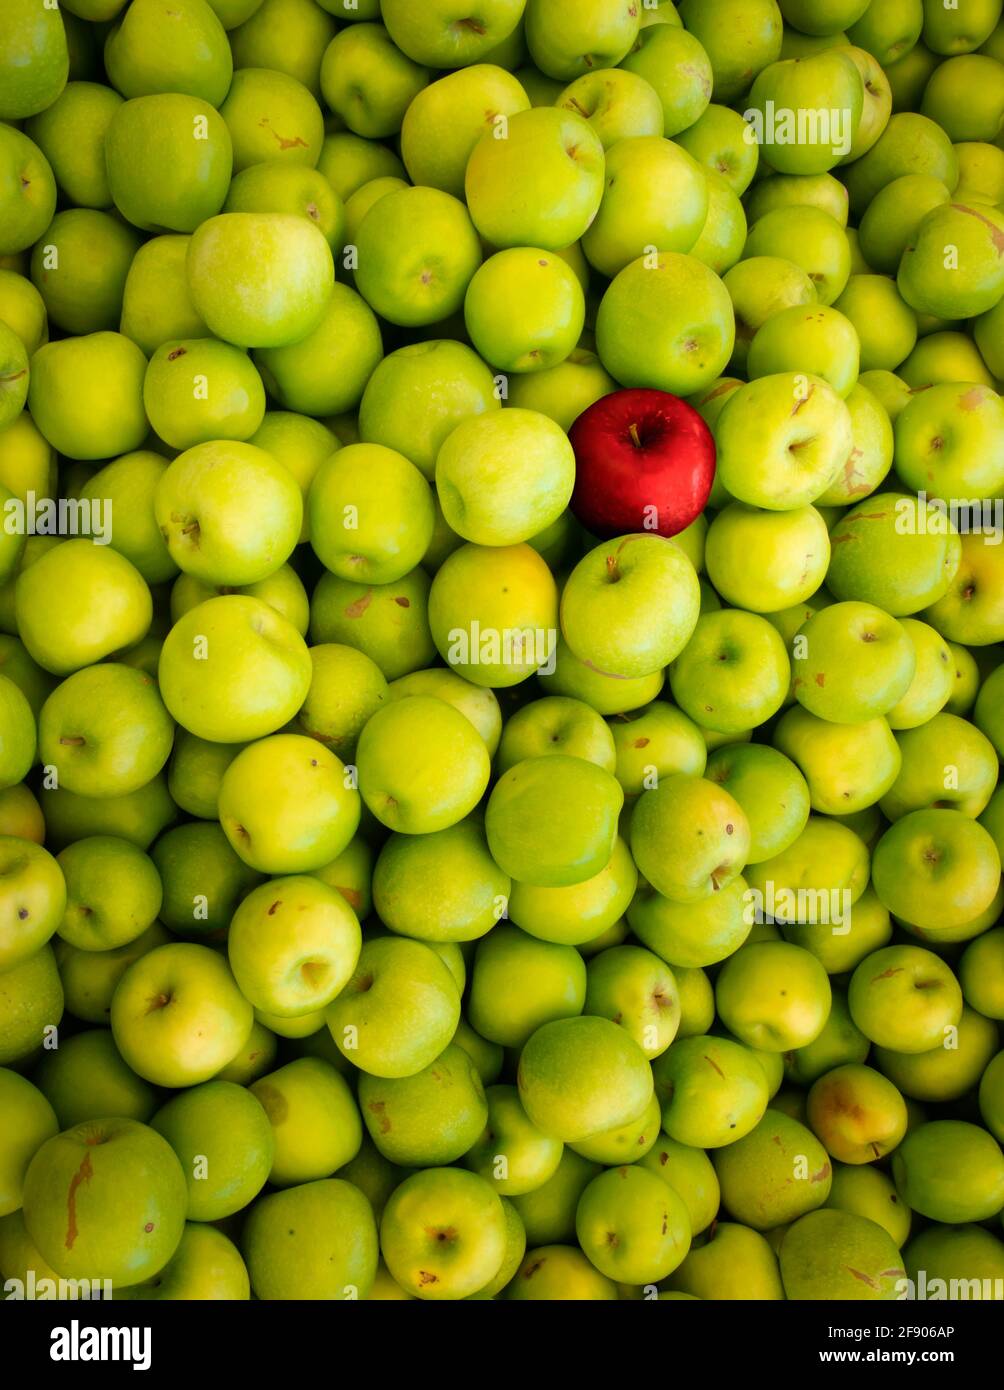 One Red Apple amongst a stack of green apples Stock Photo